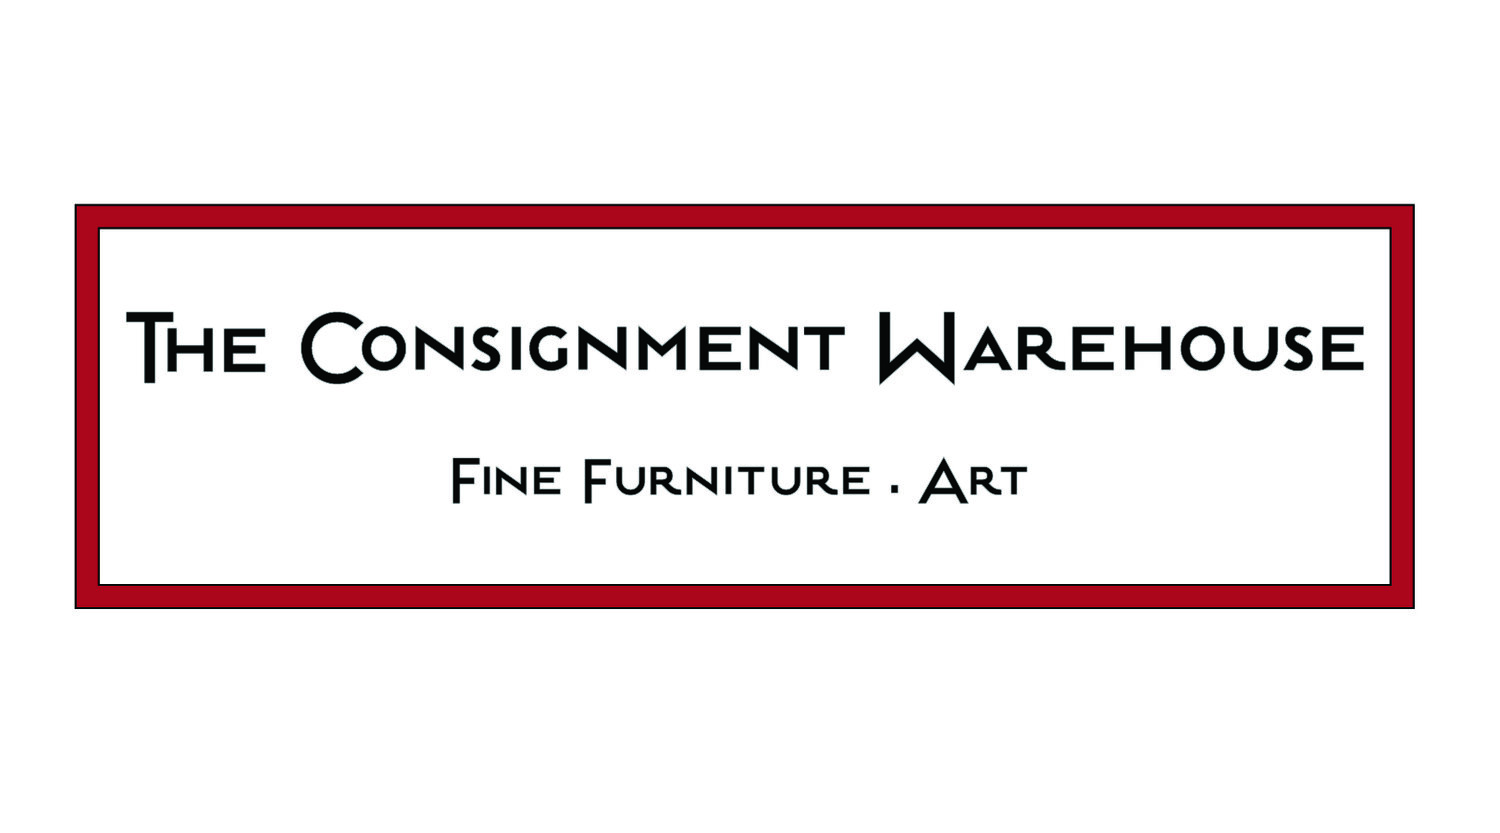 The Consignment Warehouse